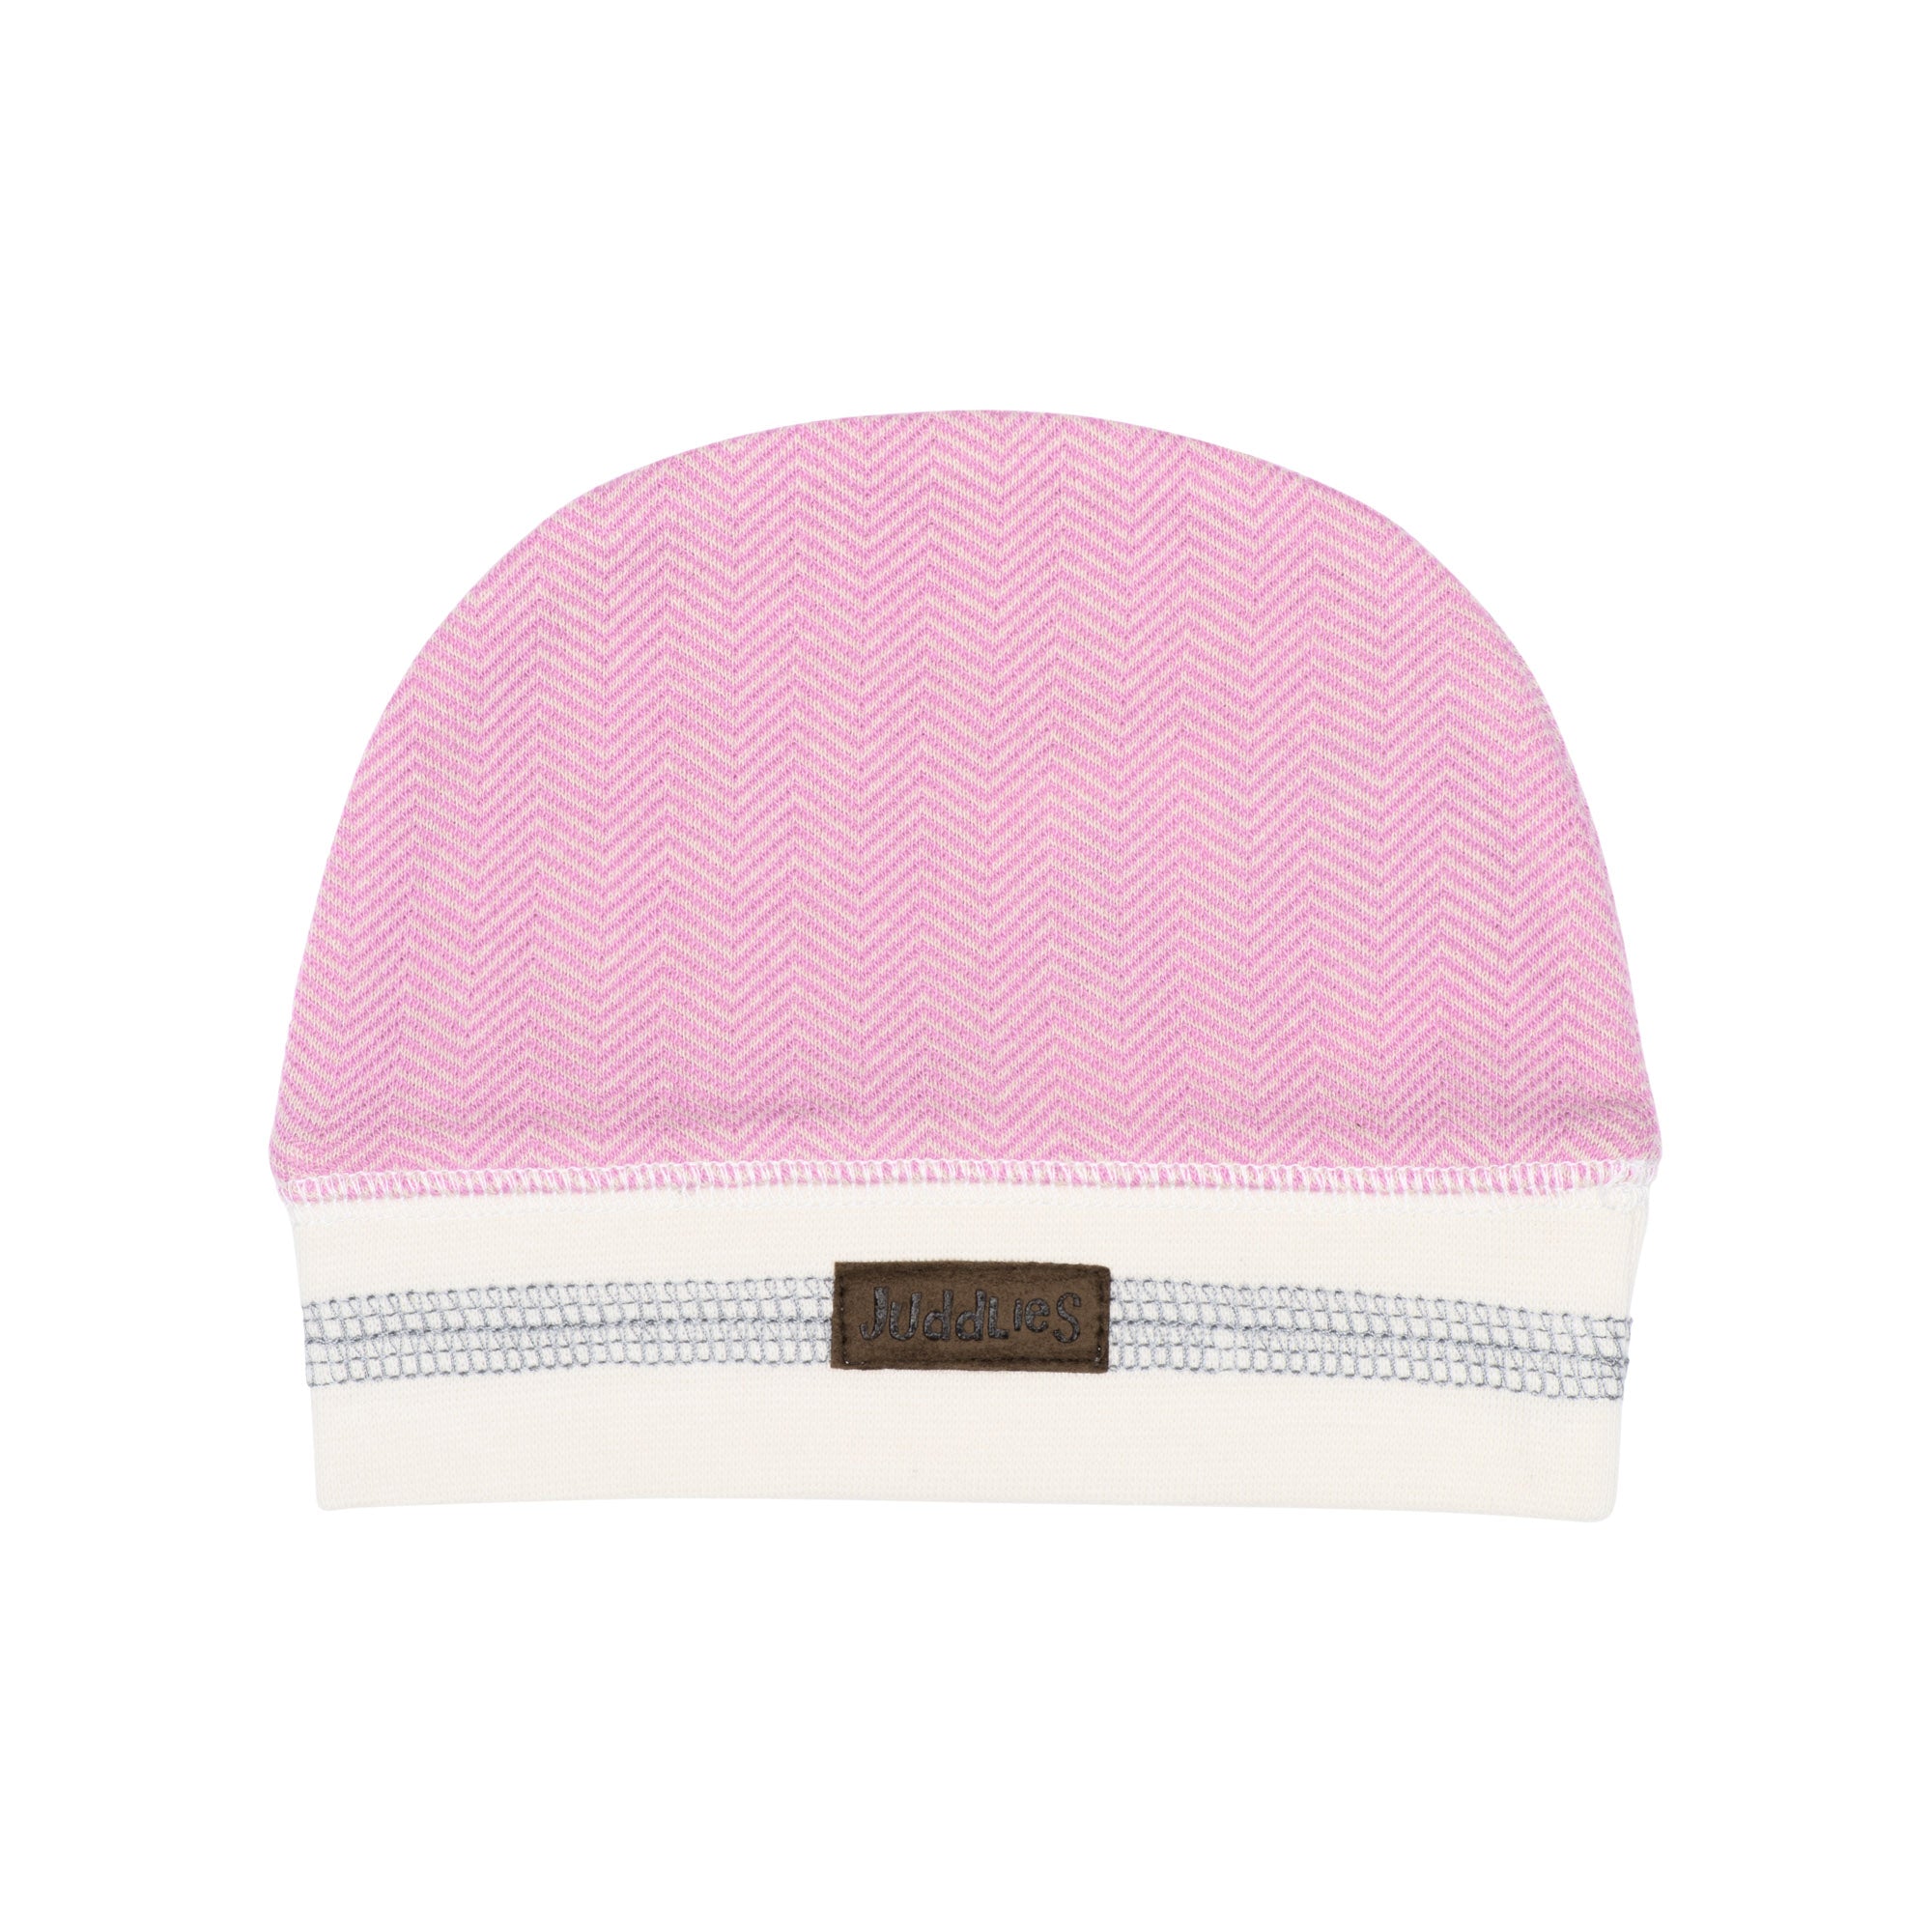 CHALET COLLECTION HAT